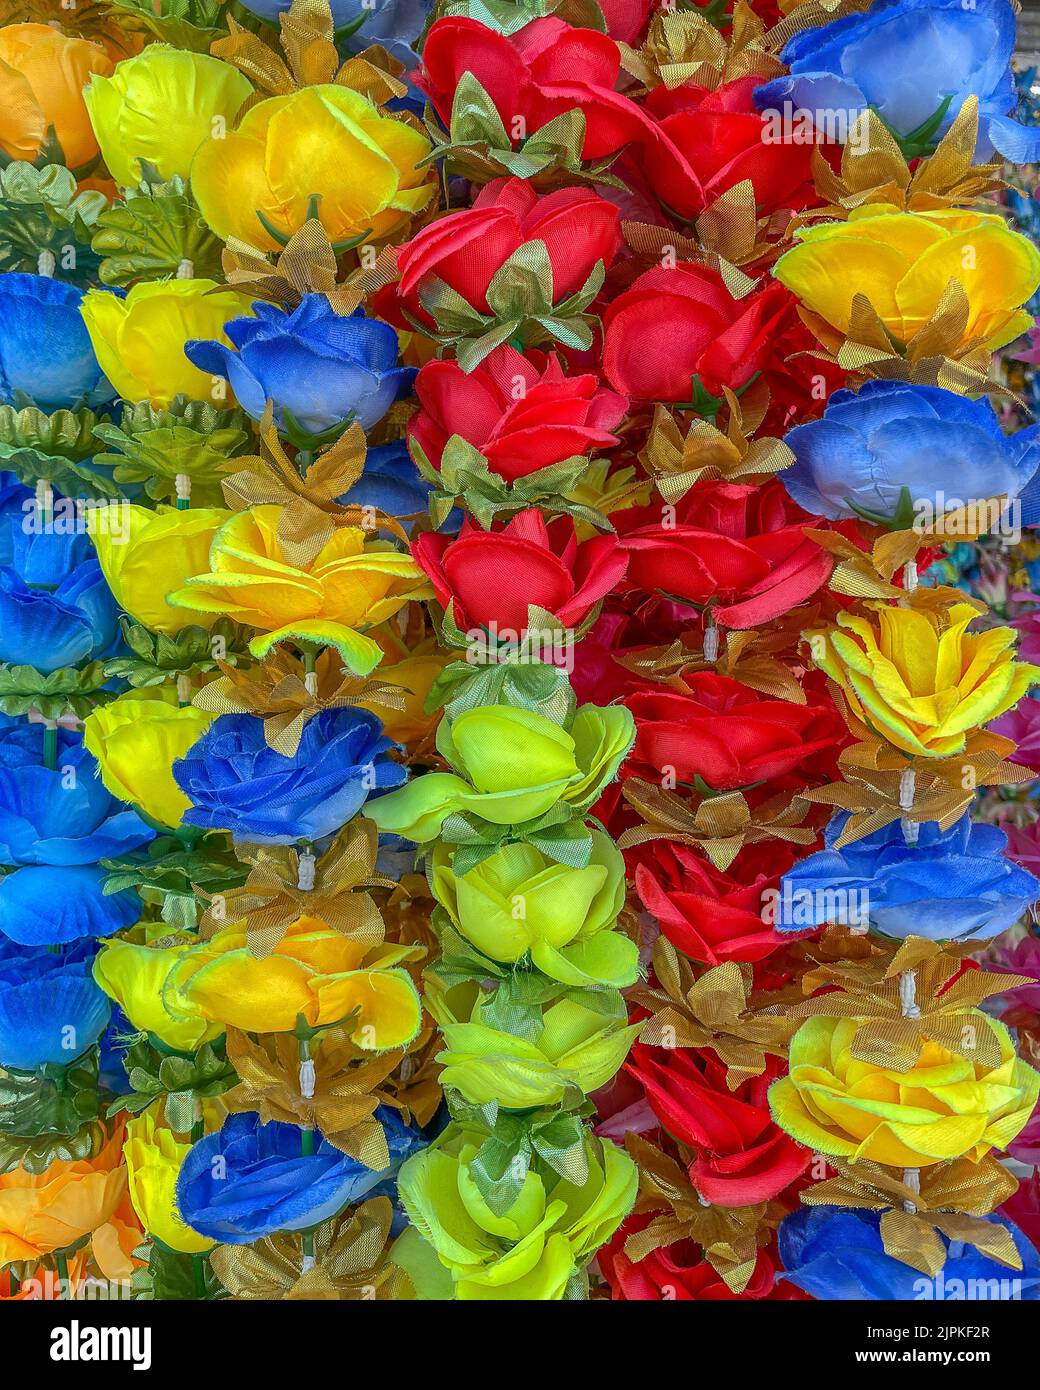 Close up of blue, yellow, and red cloth flowers. Stock Photo